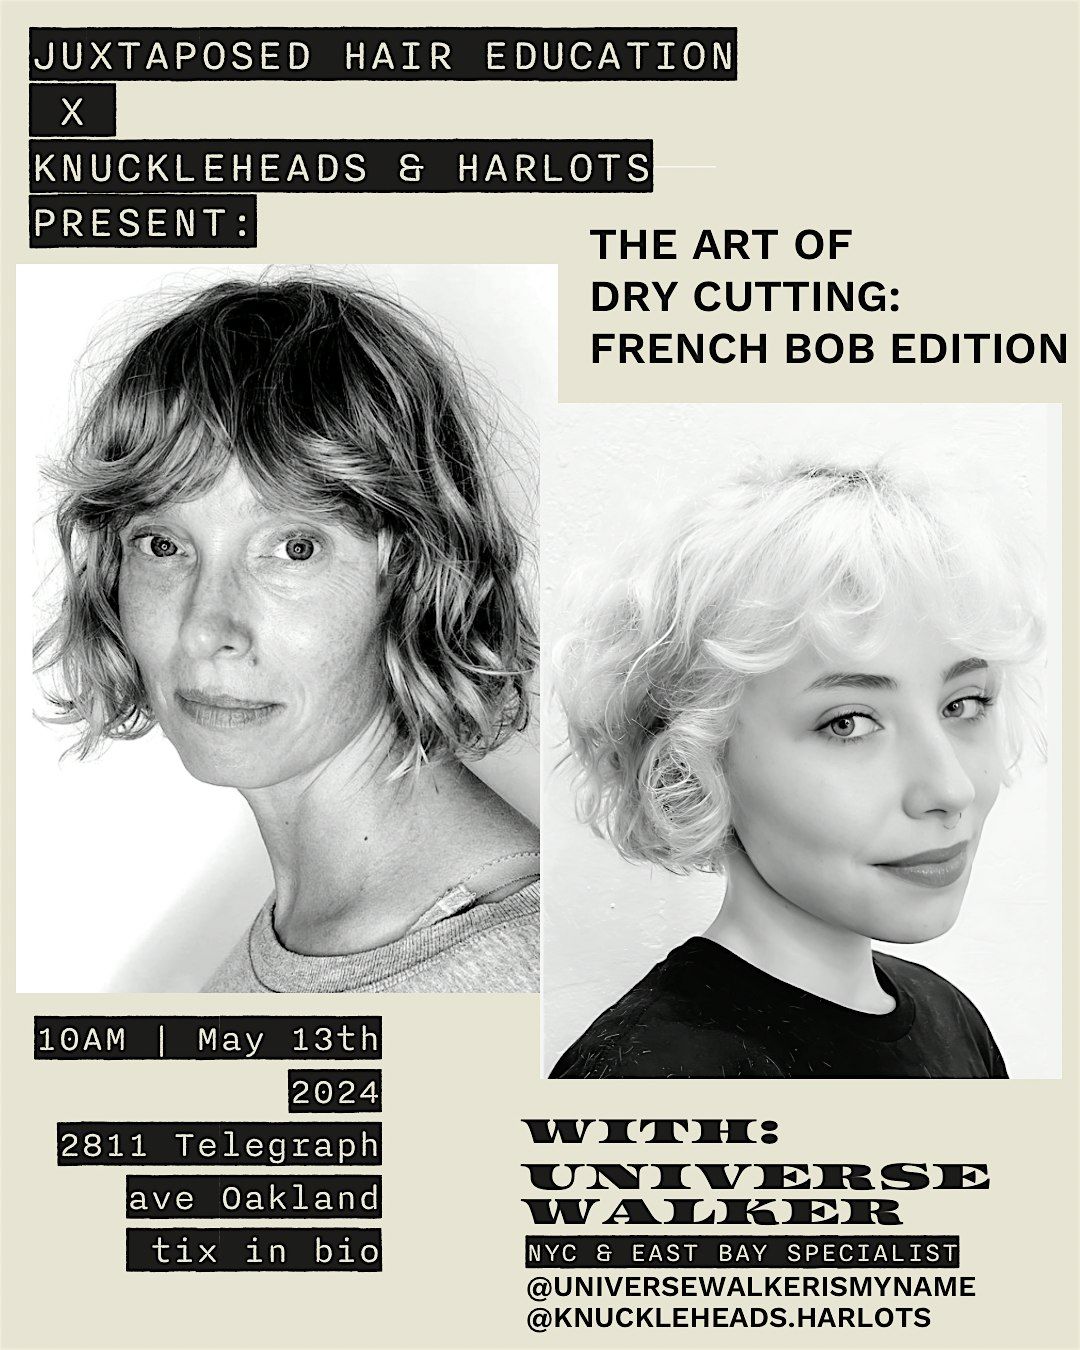 The Art of Dry Cutting:French Bob Edition